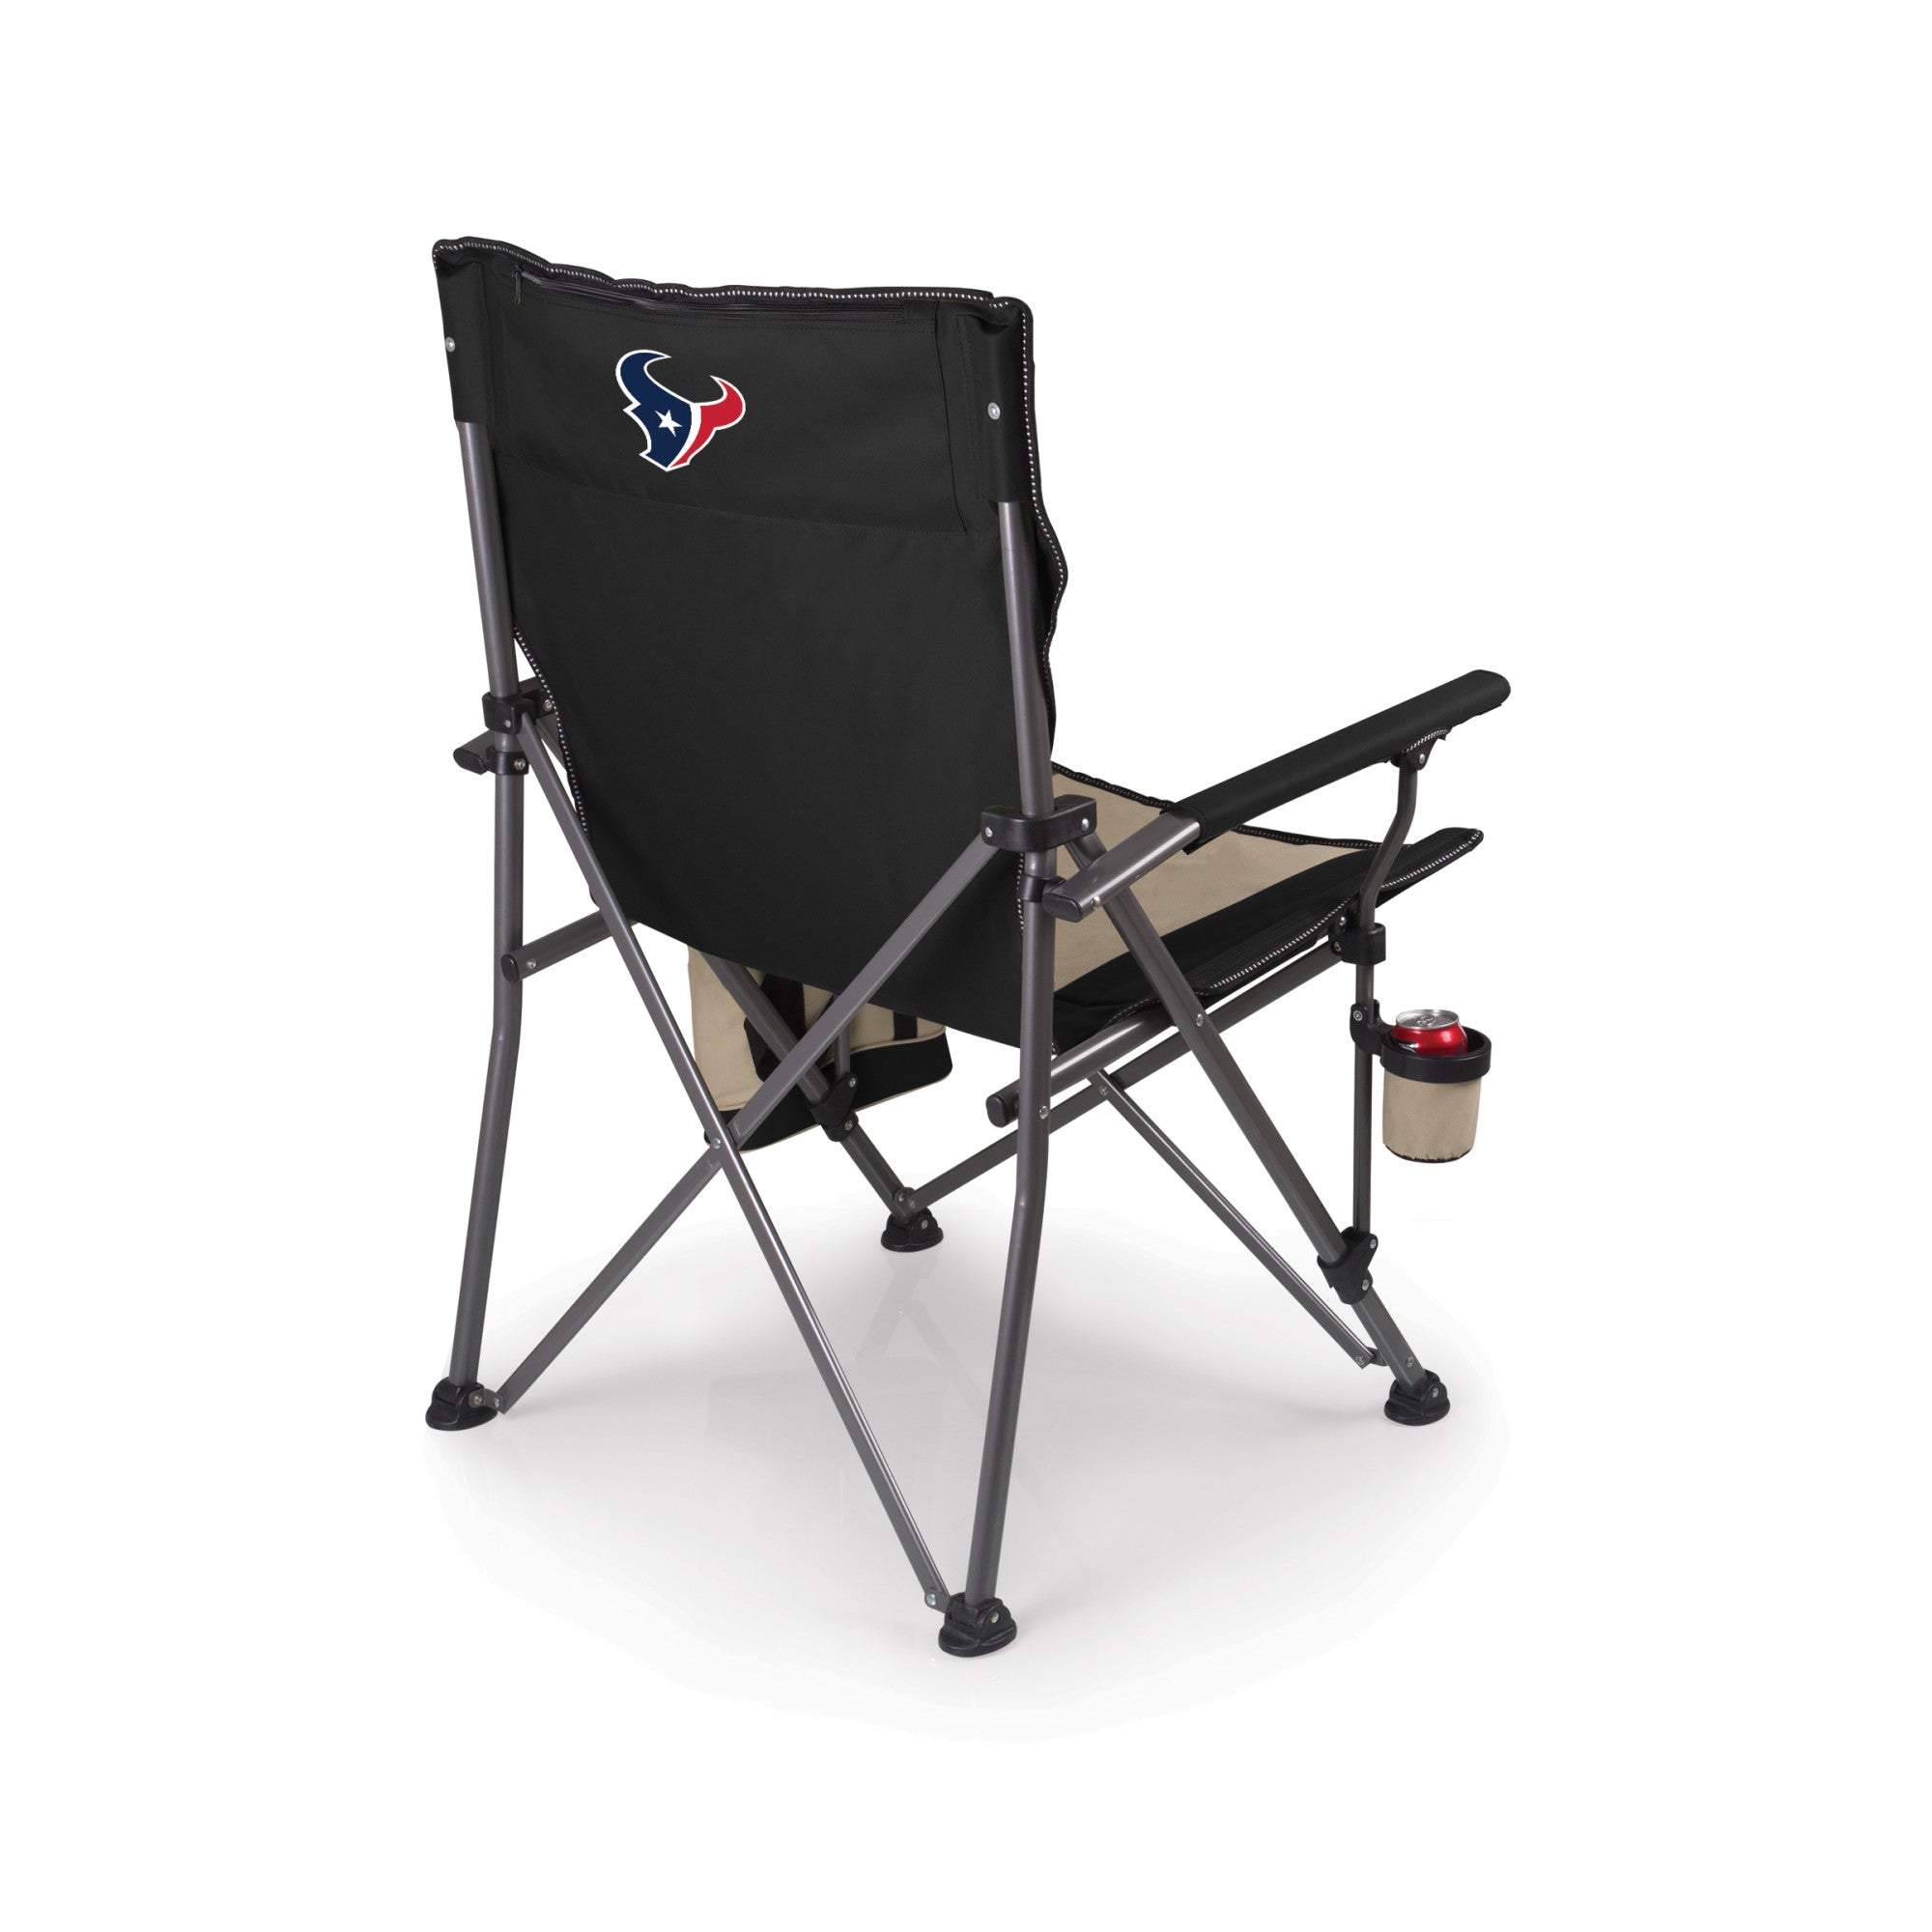 Houston Texans - Big Bear XXL Camping Chair with Cooler